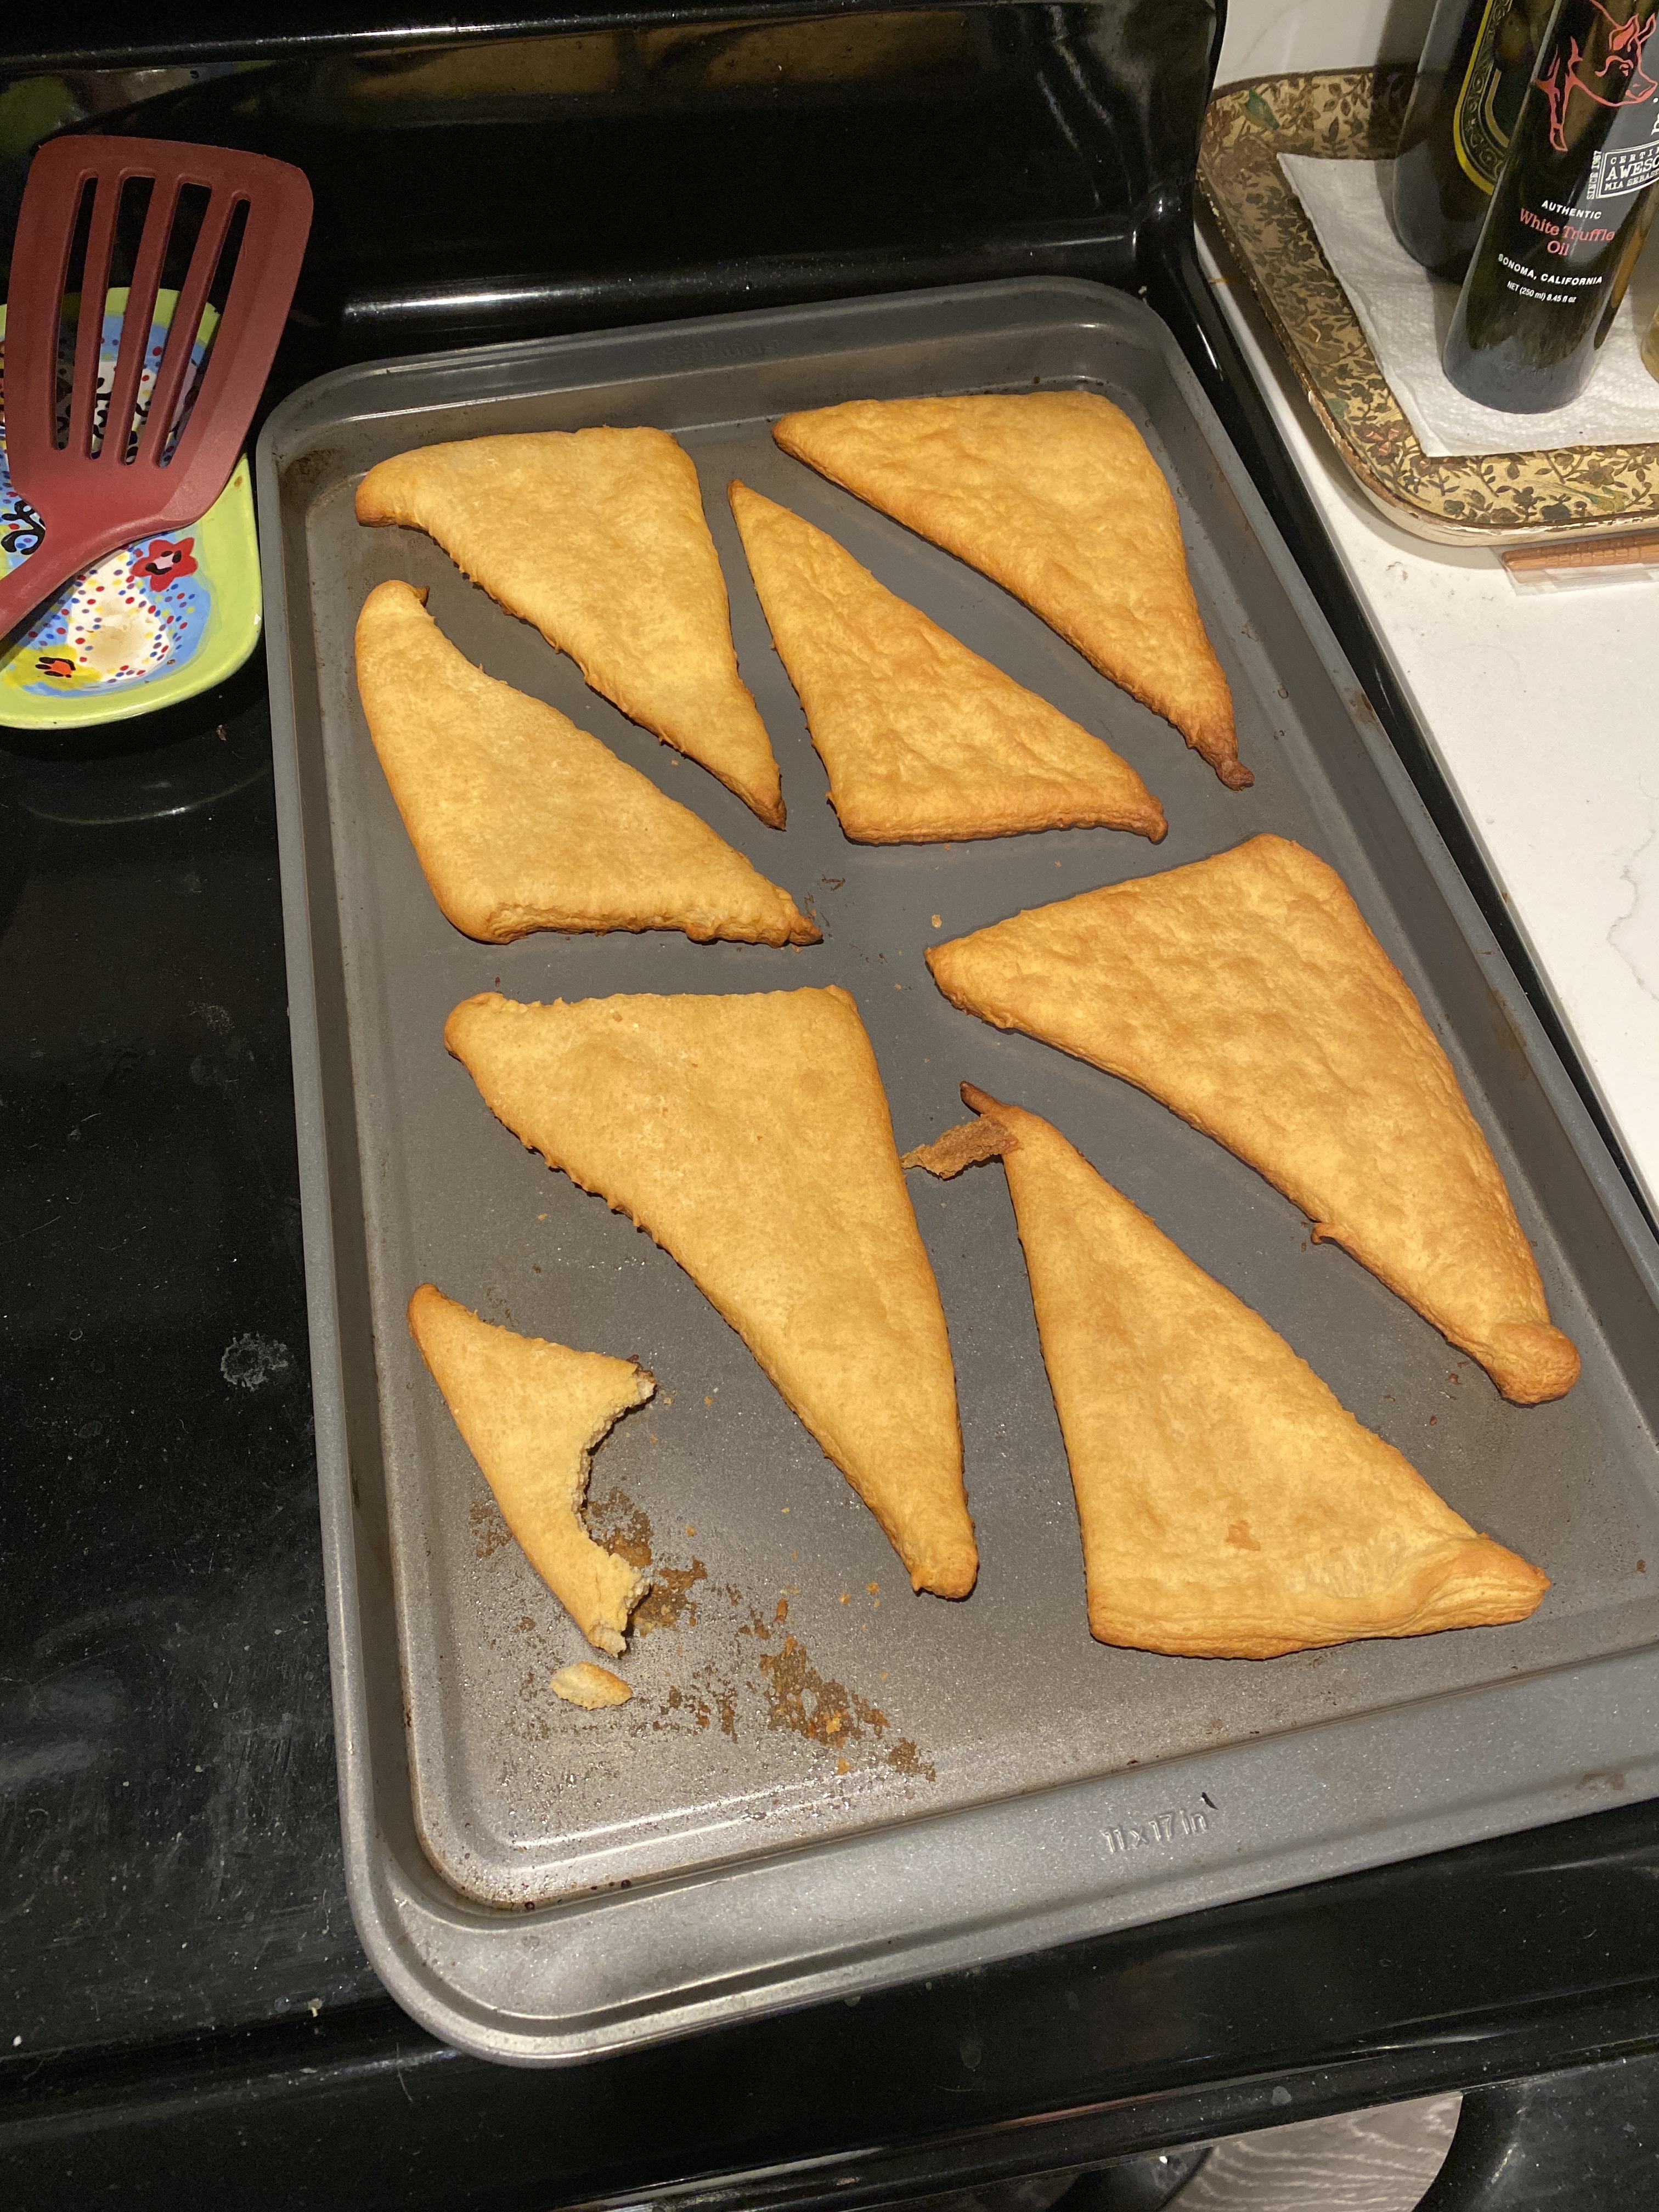 pillsbury croissants, unrolled, laid flat, on a baking sheet coming out baked like flat triangles